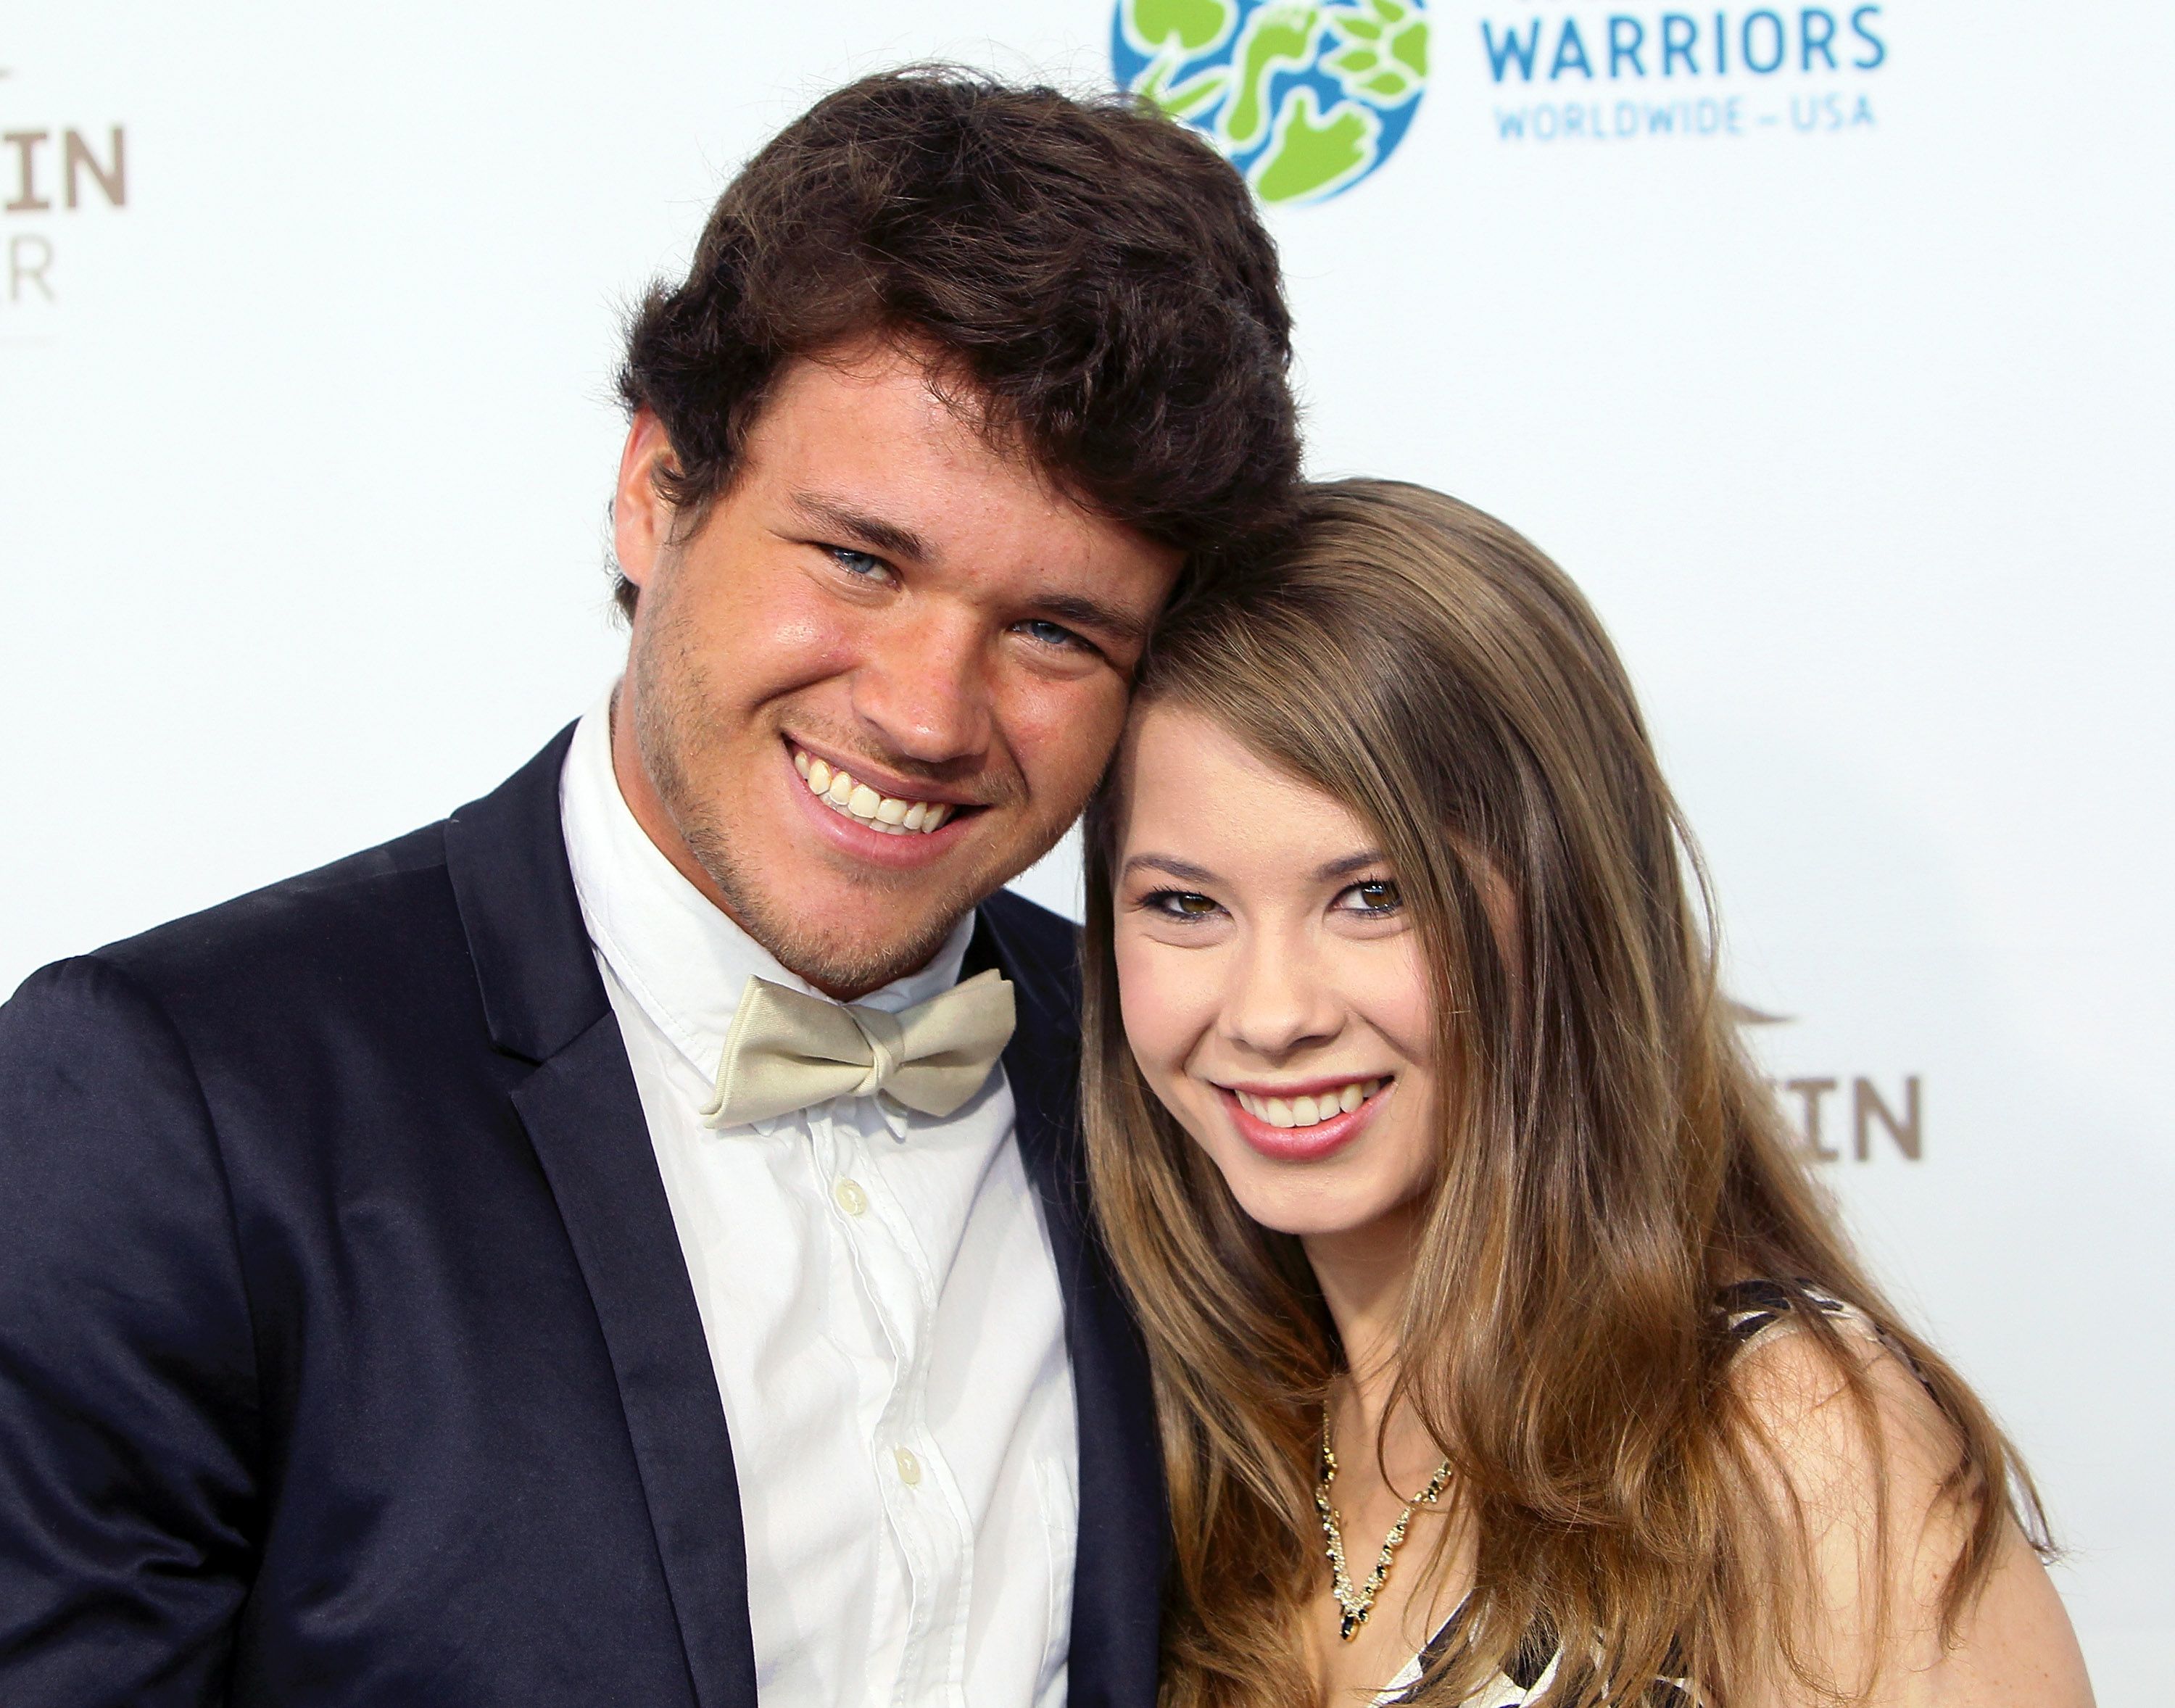 Chandler Powell and Bindi Irwin attend the Steve Irwin Gala Dinner at JW Marriott Los Angeles on May 21, 2016 in California. | Photo: Getty Images